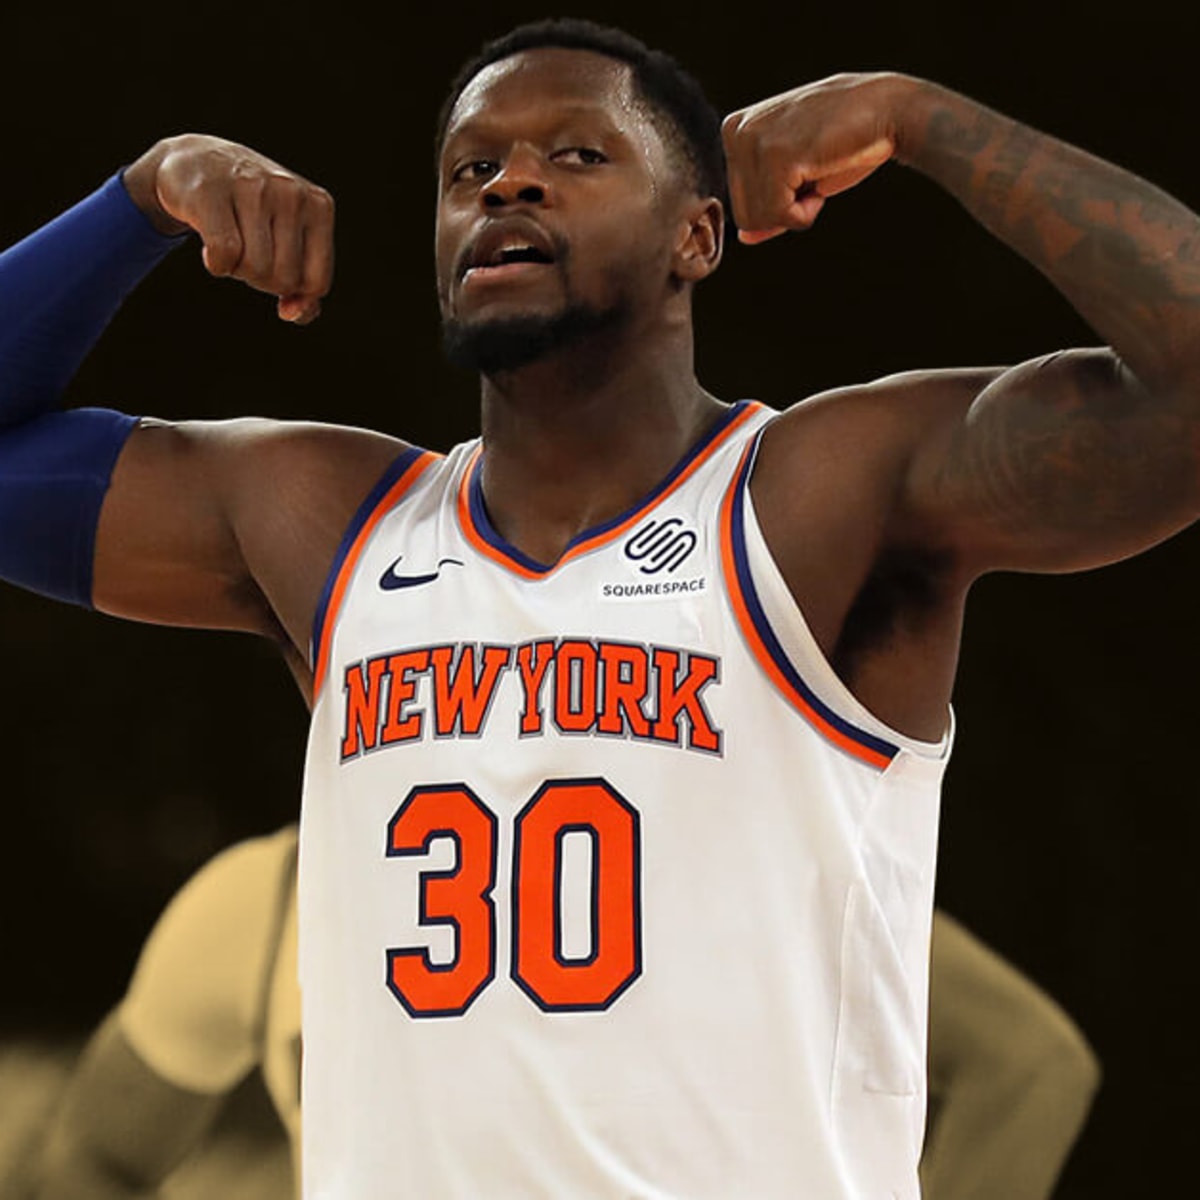 Safe to say that Knicks fans were unhappy with Julius Randle after